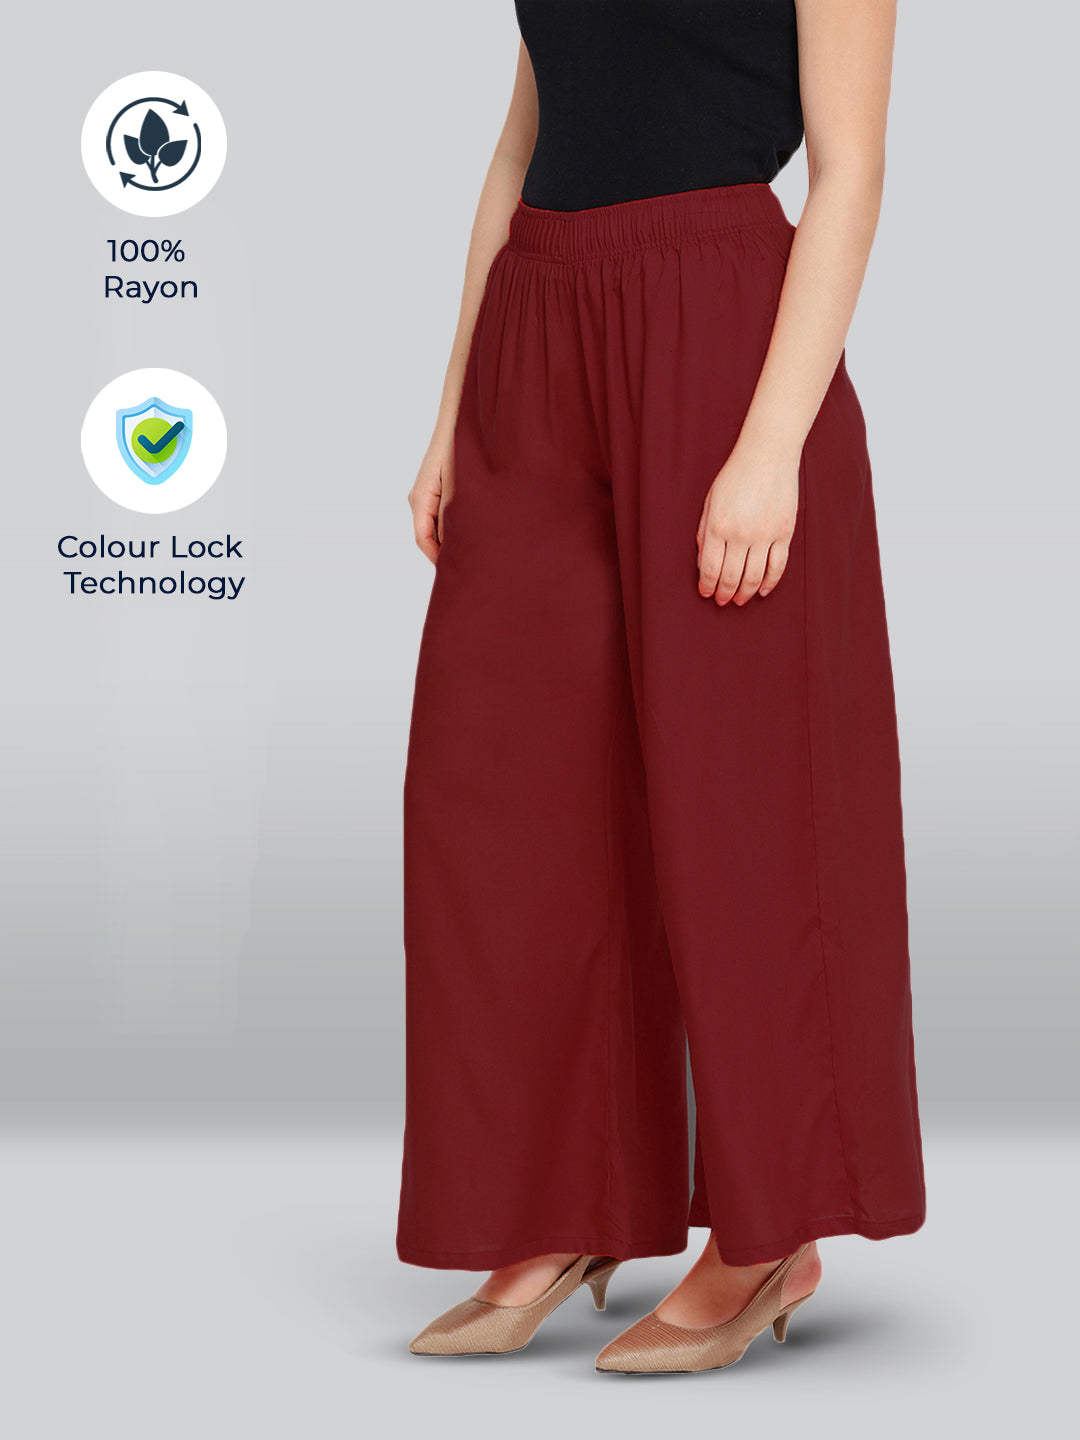 Buy LUX LYRA Relaxed Women White Trousers Online at Best Prices in India |  Flipkart.com